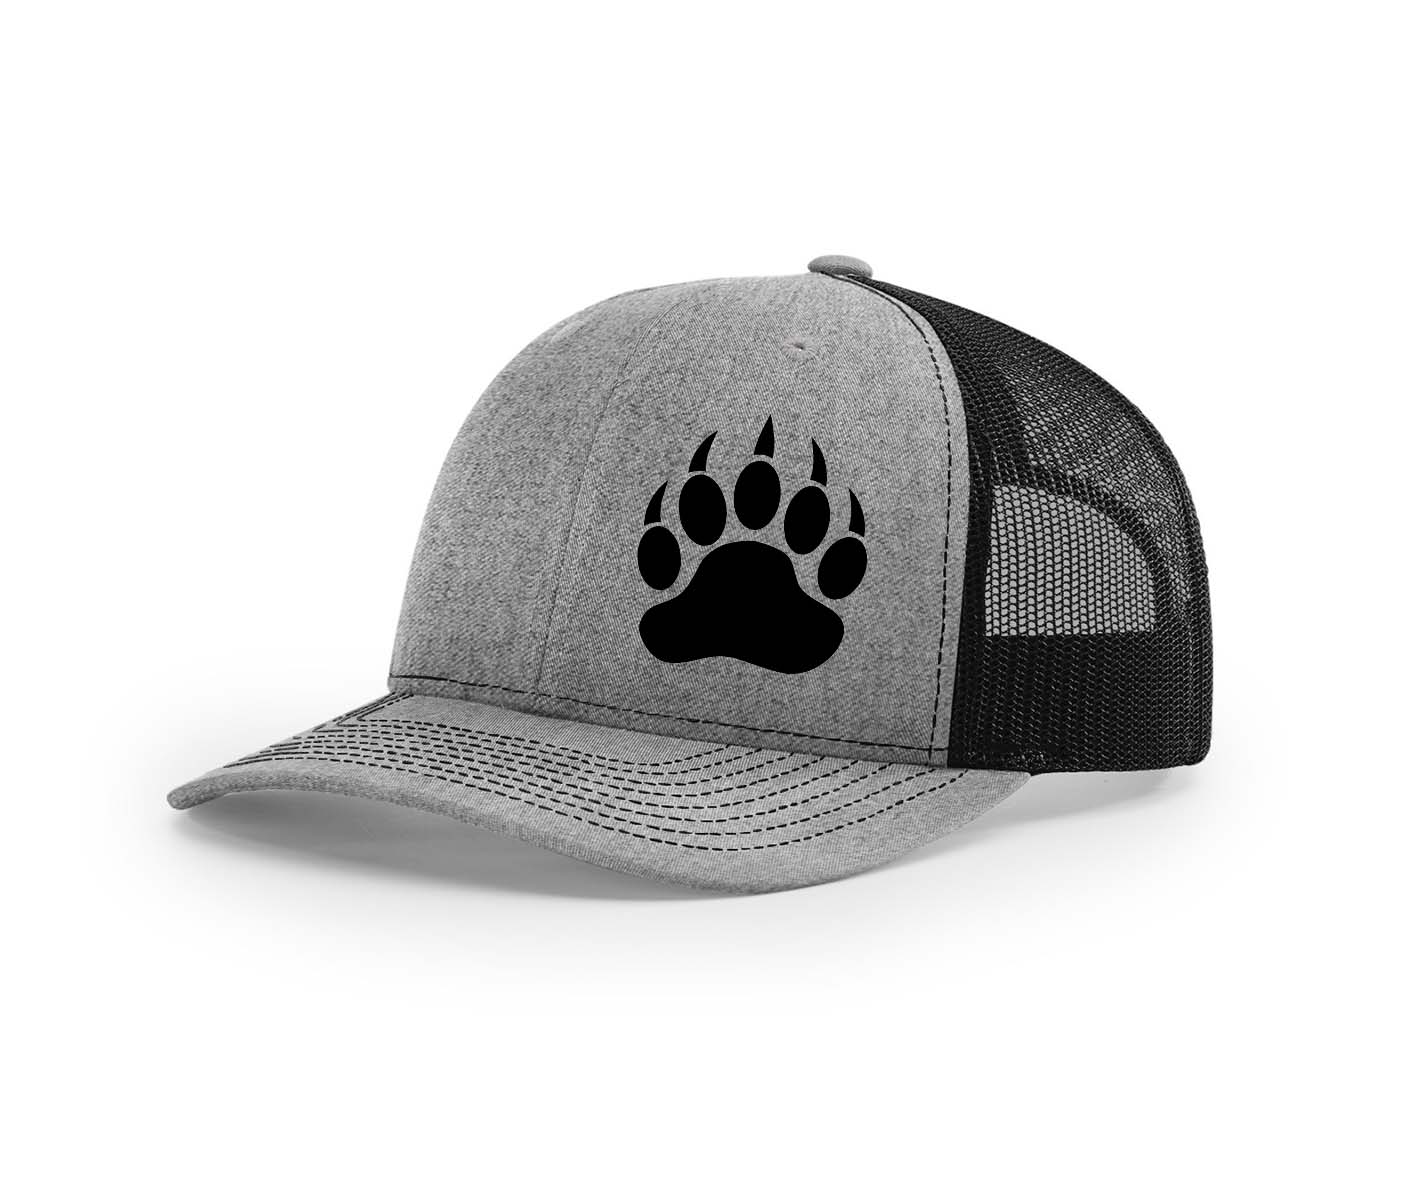 Southern Houndsman Hats – Tagged dog – Swamp Cracker Outdoor Apparel